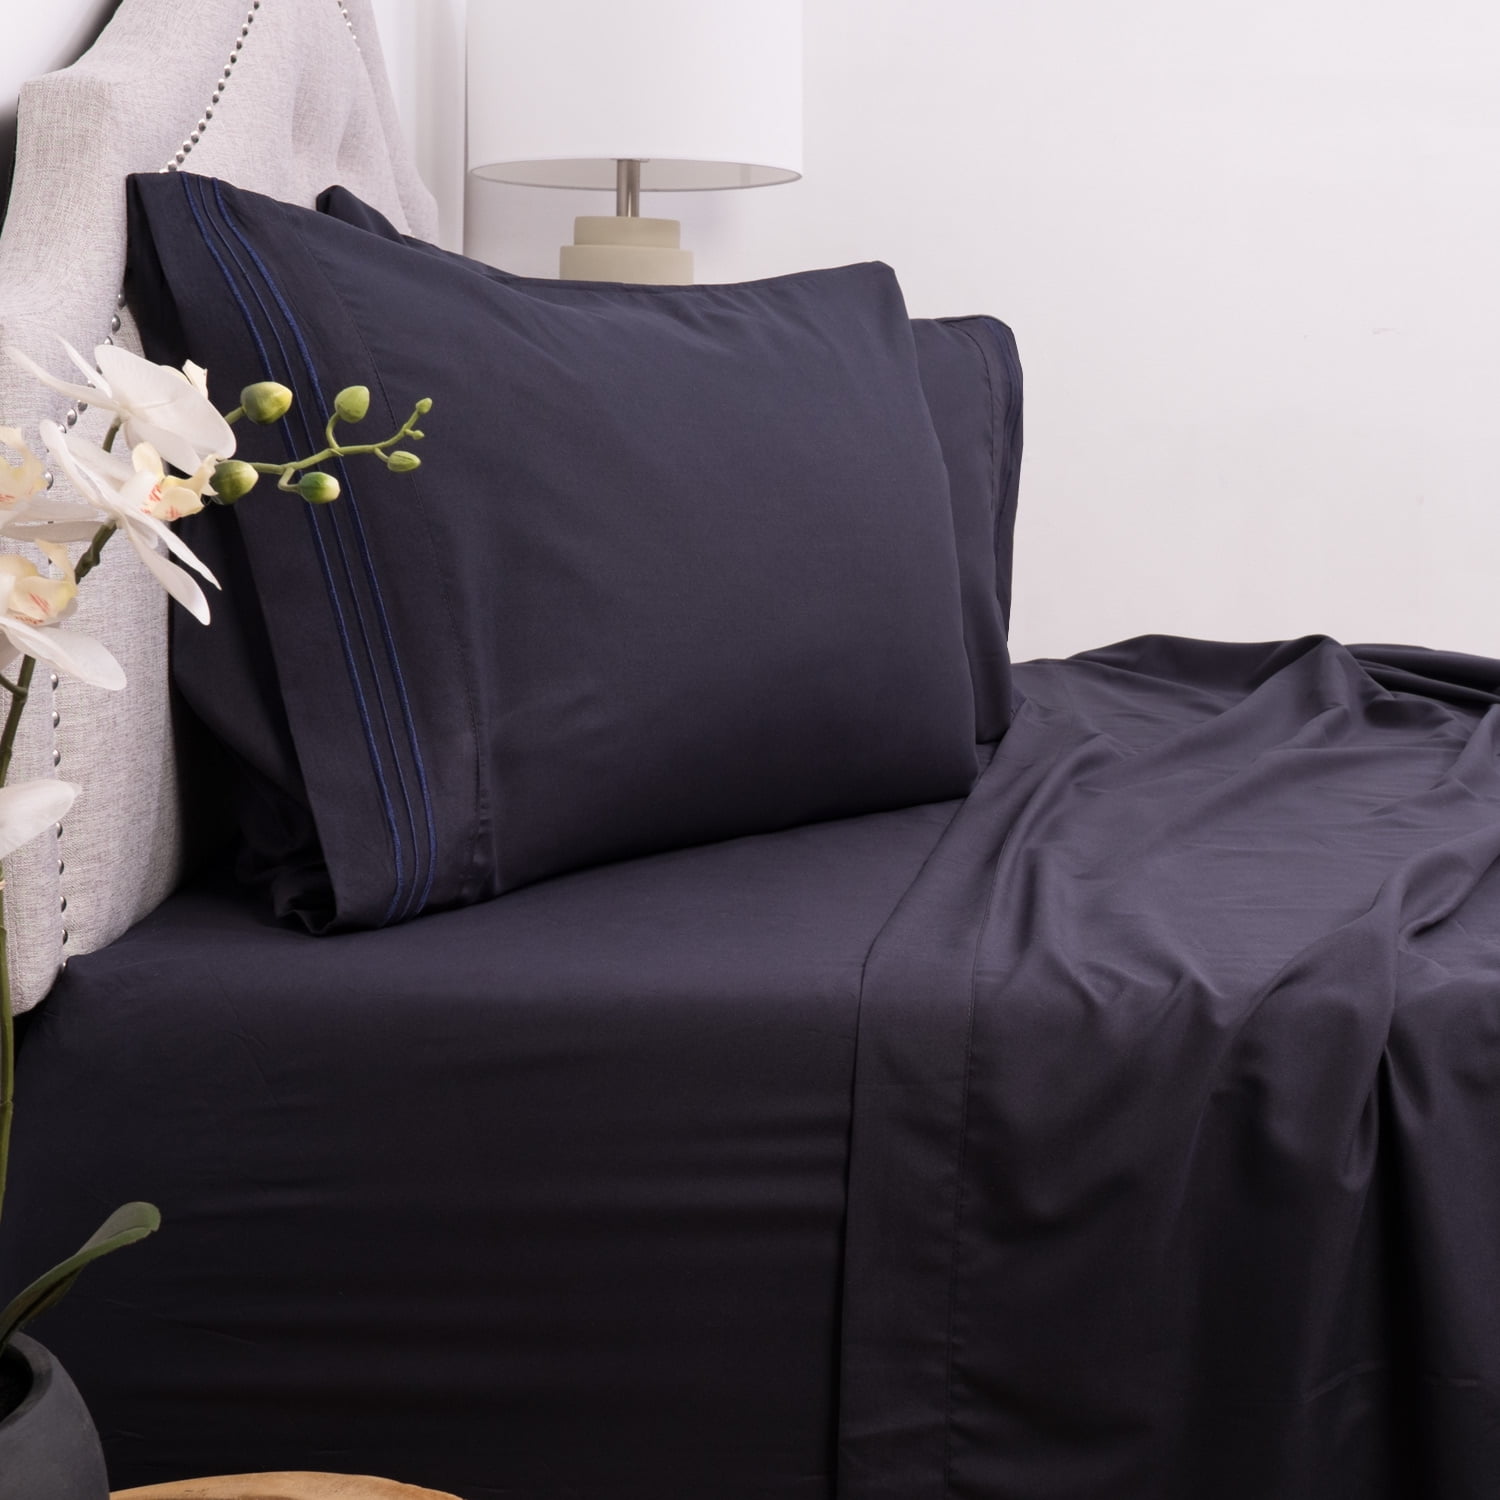  Silvon Silver Infused Bed Sheets Set